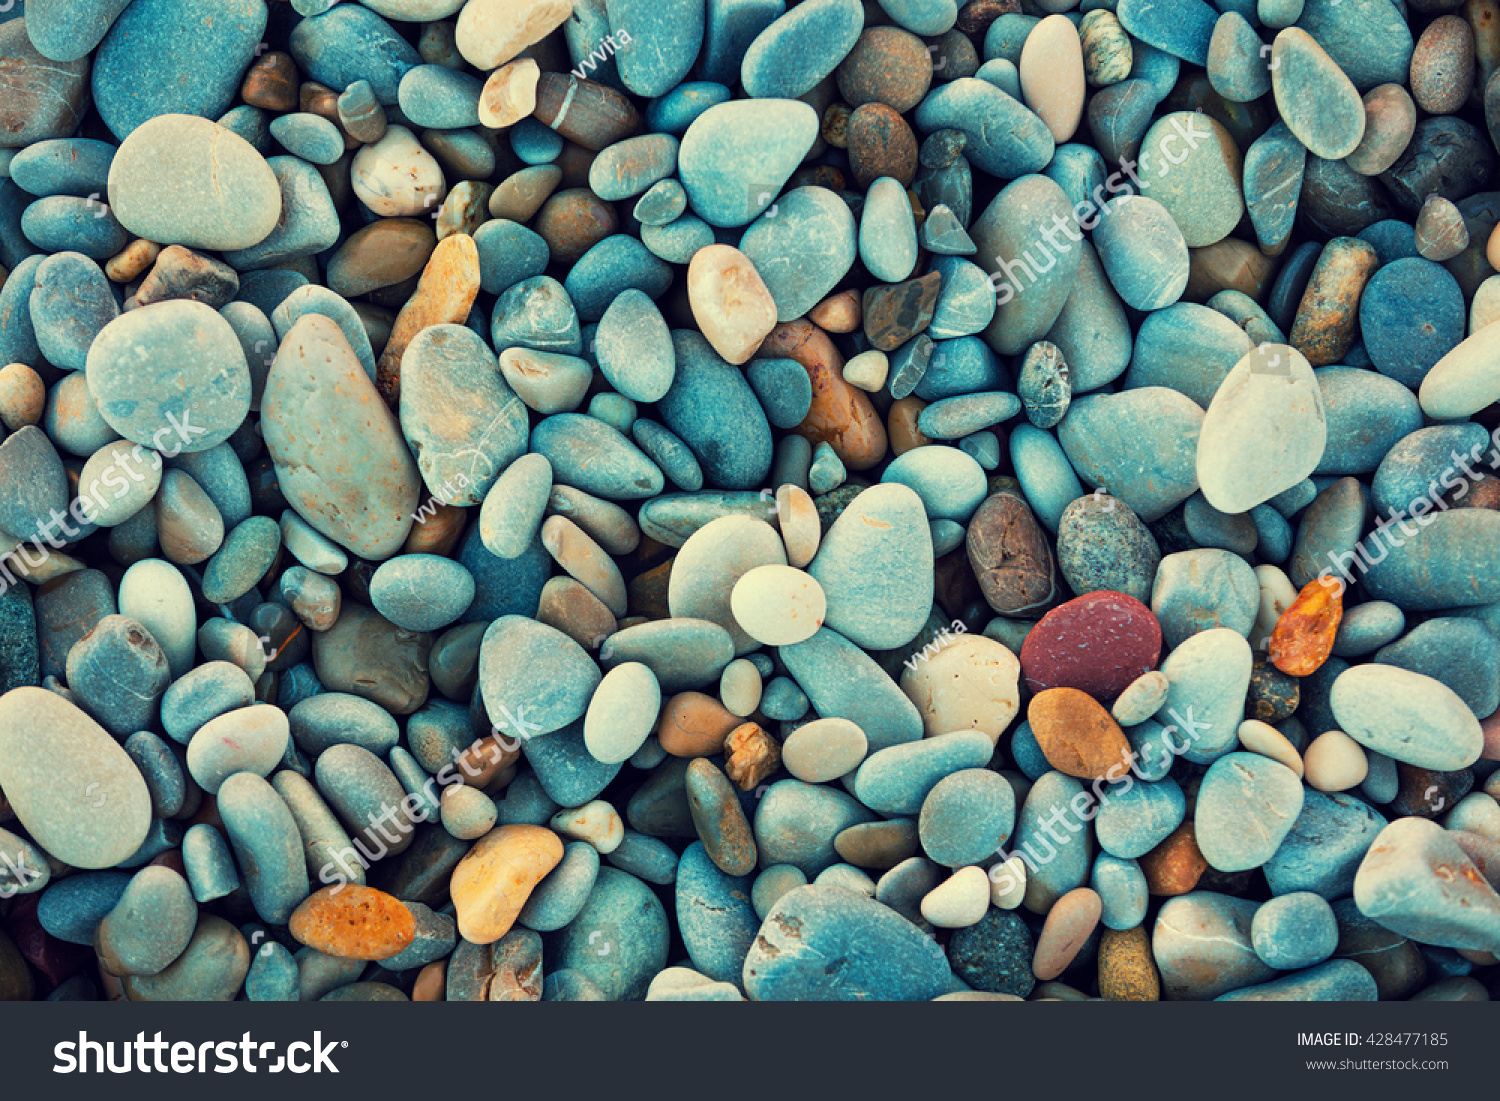 Abstract nature pebbles background. Blue pebbles texture. Stone background.  Blue vintage color. Sea pebble beach. Beautiful nature. Turquoise color #428477185